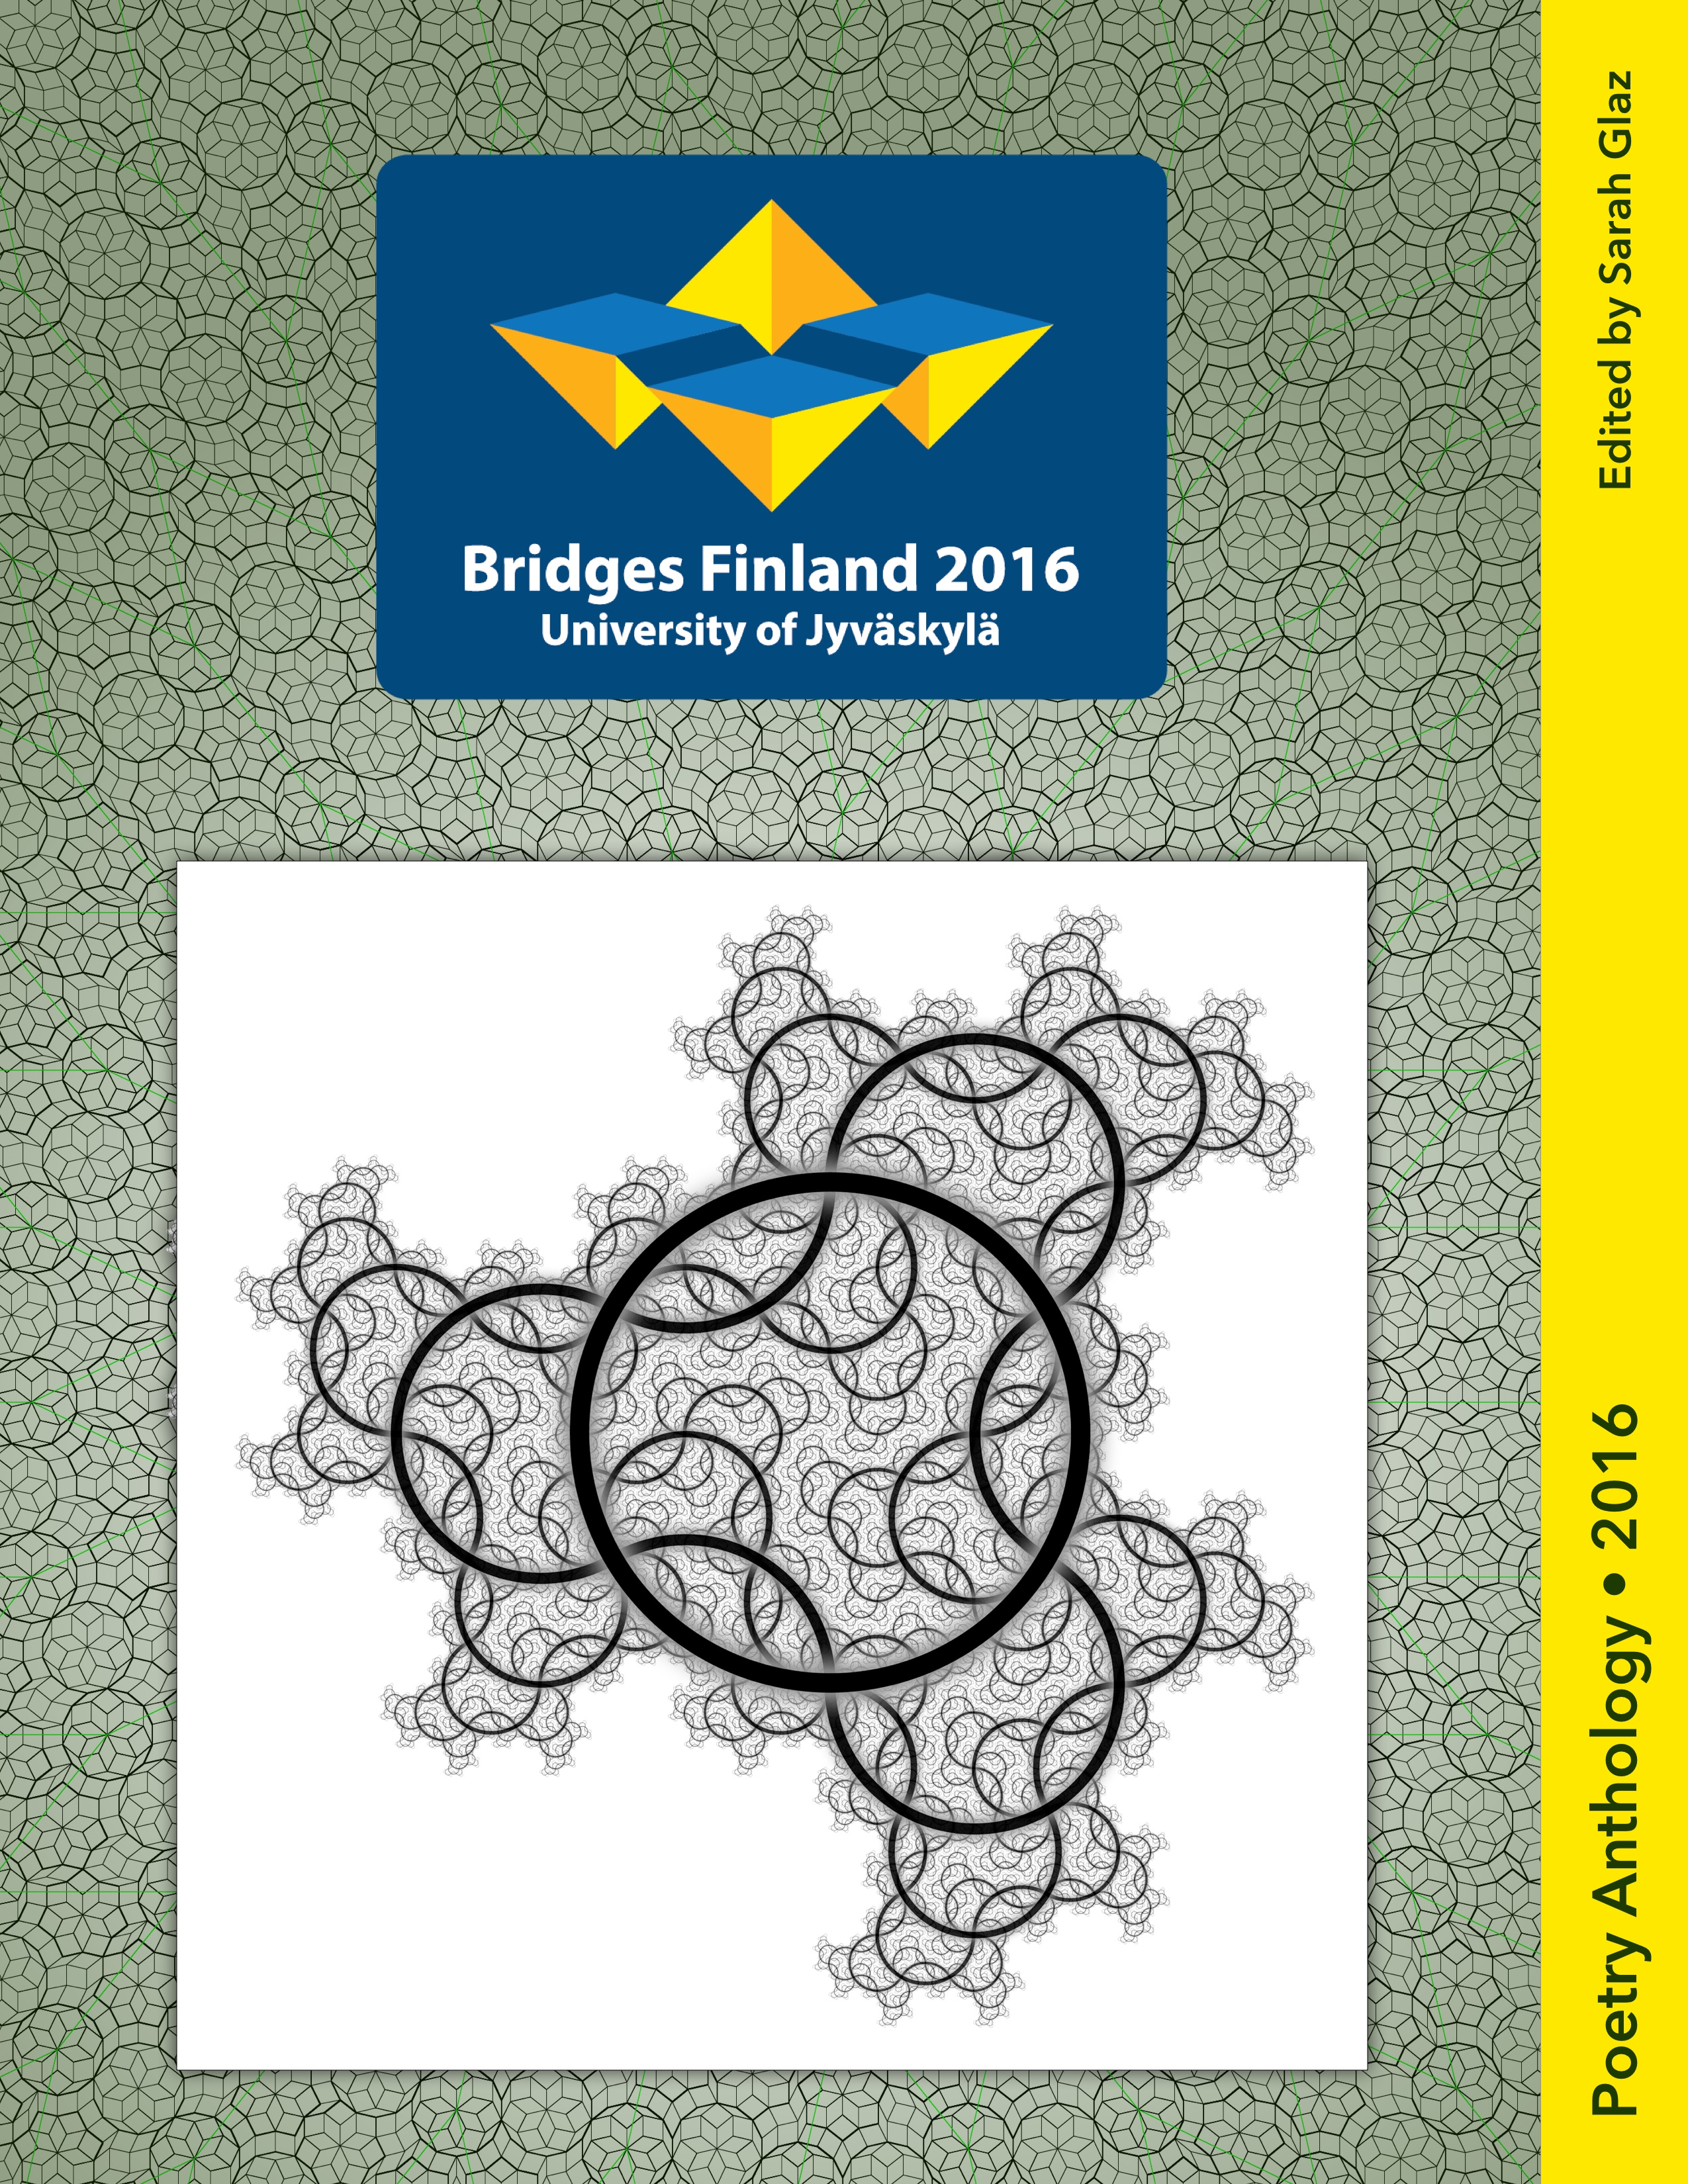 Brisges 2016 Poetry Anthology